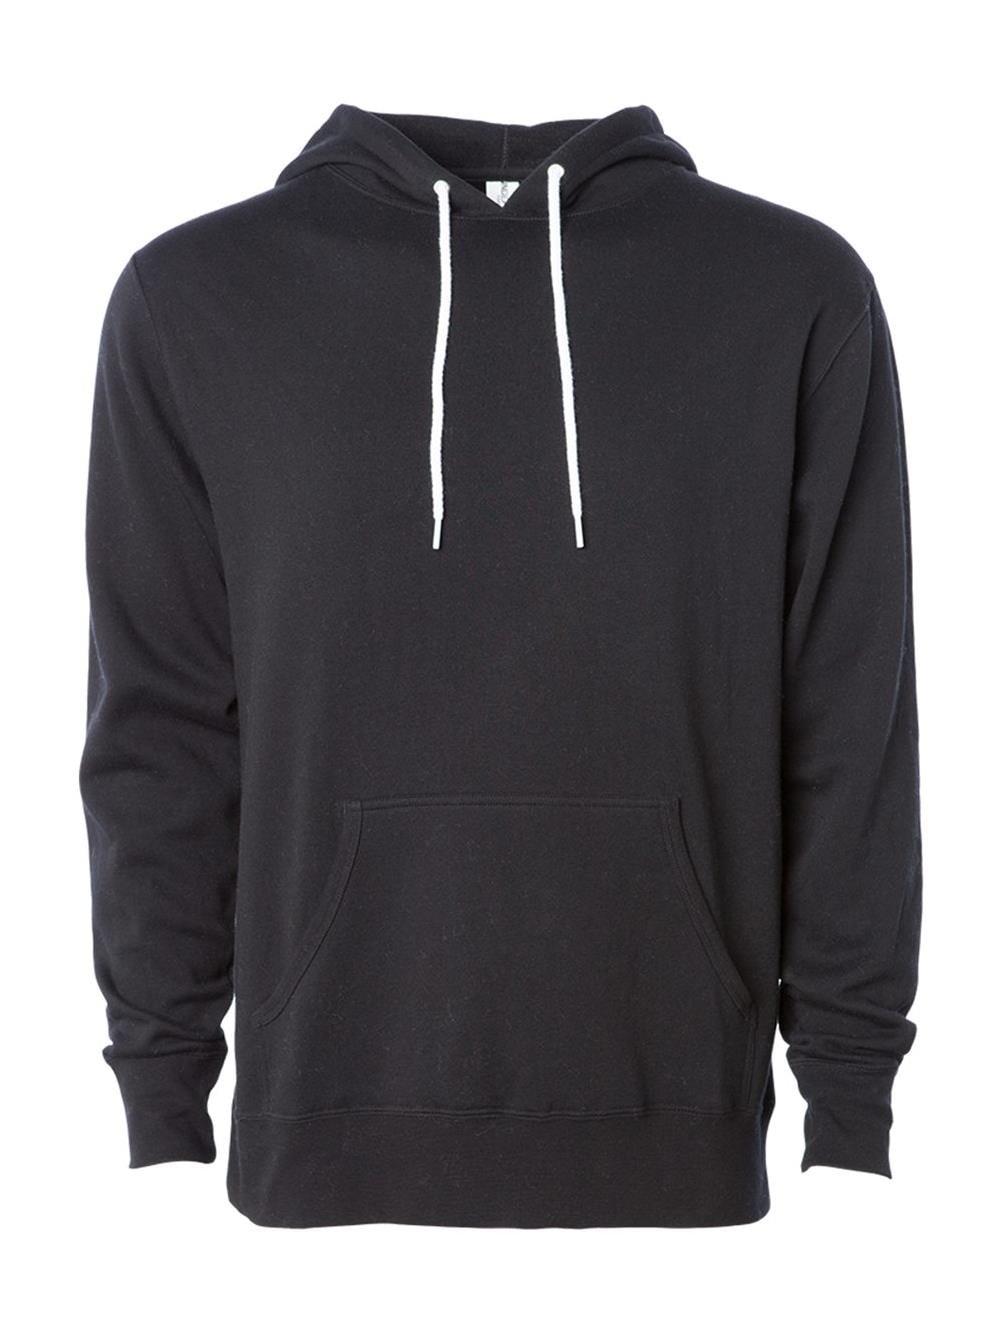 Independent Trading Co. - AFX90UN Independent Trading Co. Fleece Unisex ...